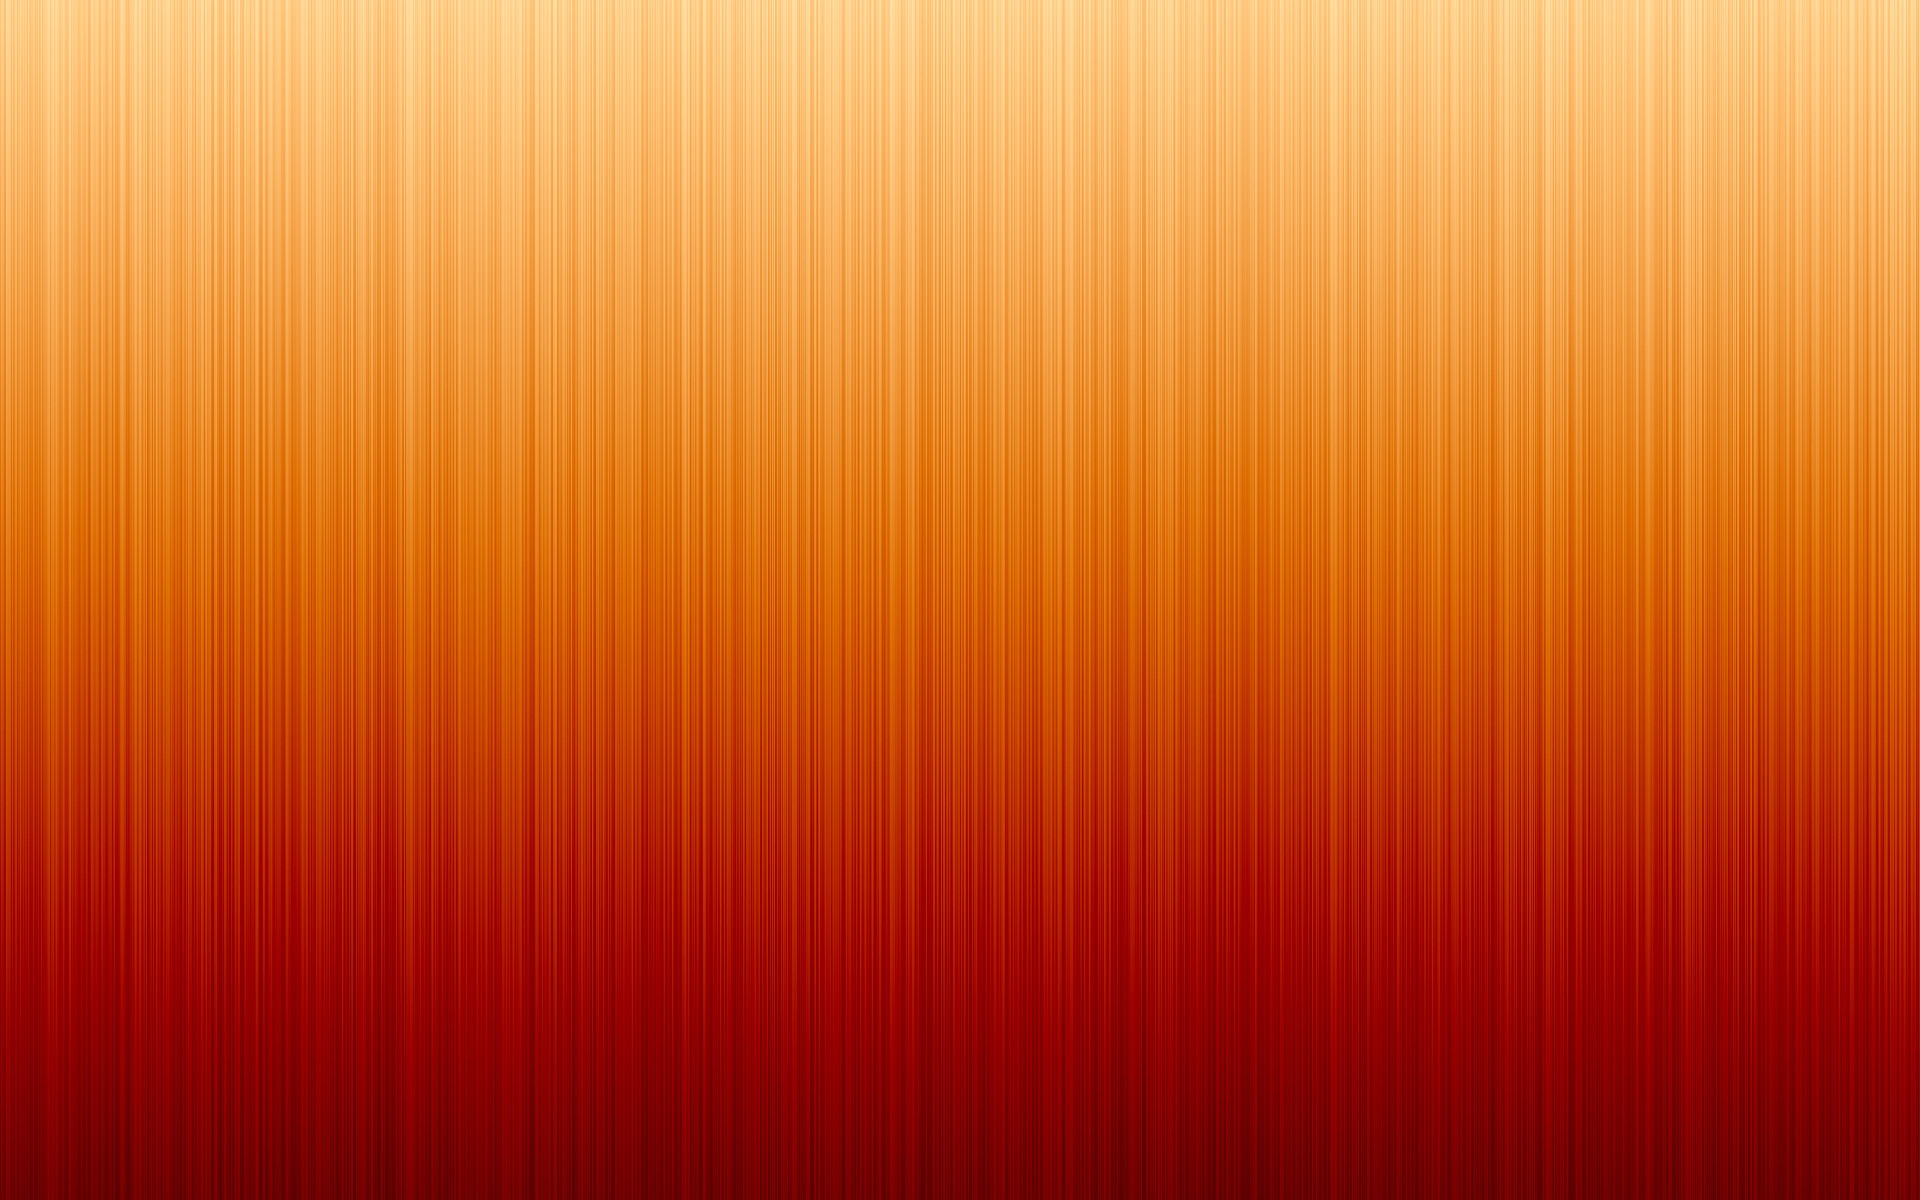 1920x1200 Abstract-minimalistic-orange-fresh-new-hd-wallpaper -best-quality-desktop-background-picture-colour-photo-orange-hd-wallpaper .png